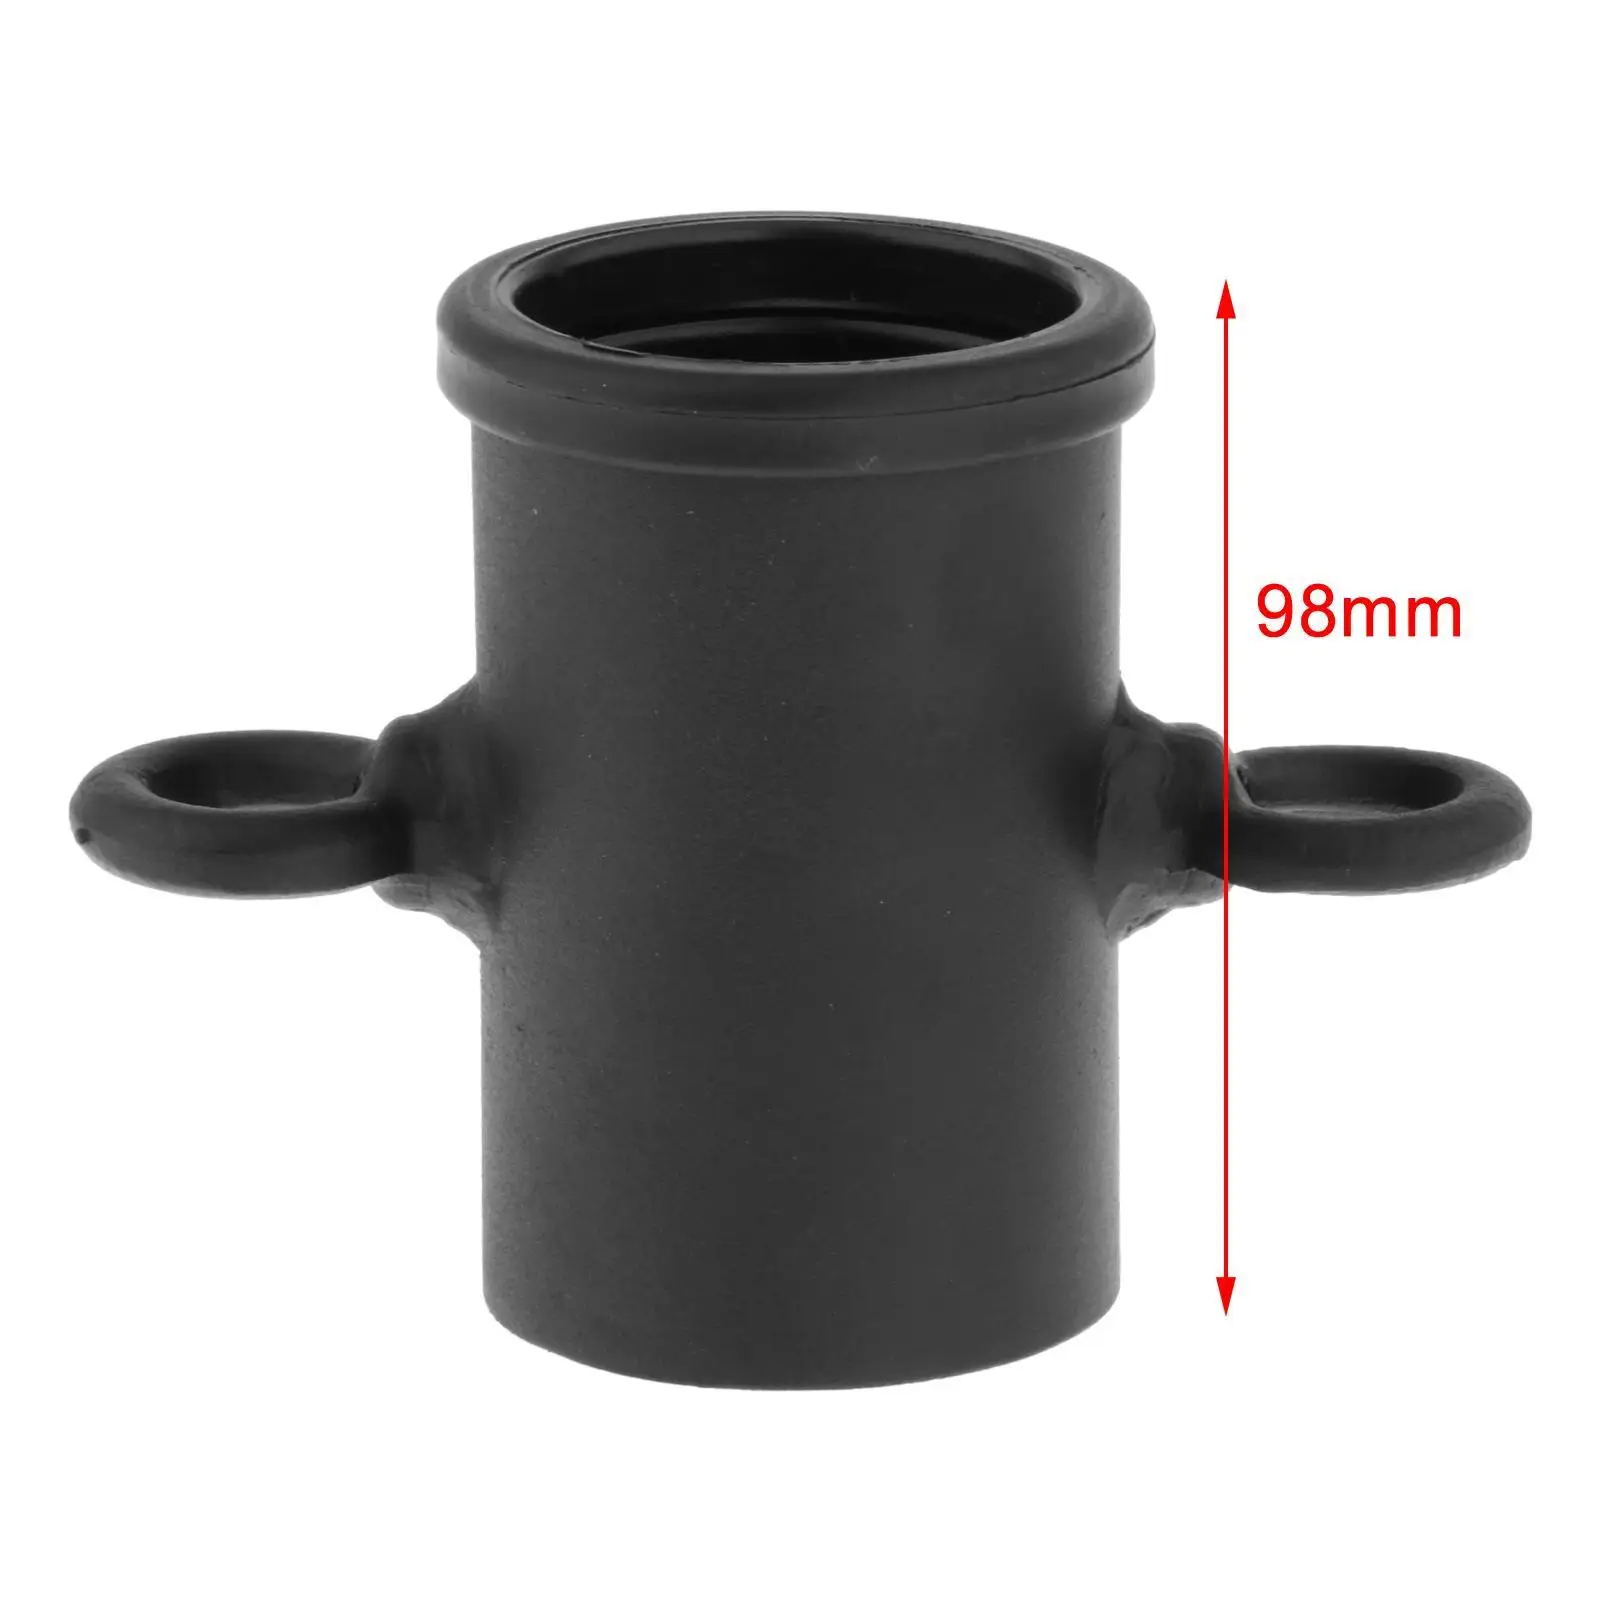 Dumbbell Landmine Eyelet Attachment Fits 2 Standard Bar T Bar Row Handle for Barbell Bar Split Squats Home Gym Fitness